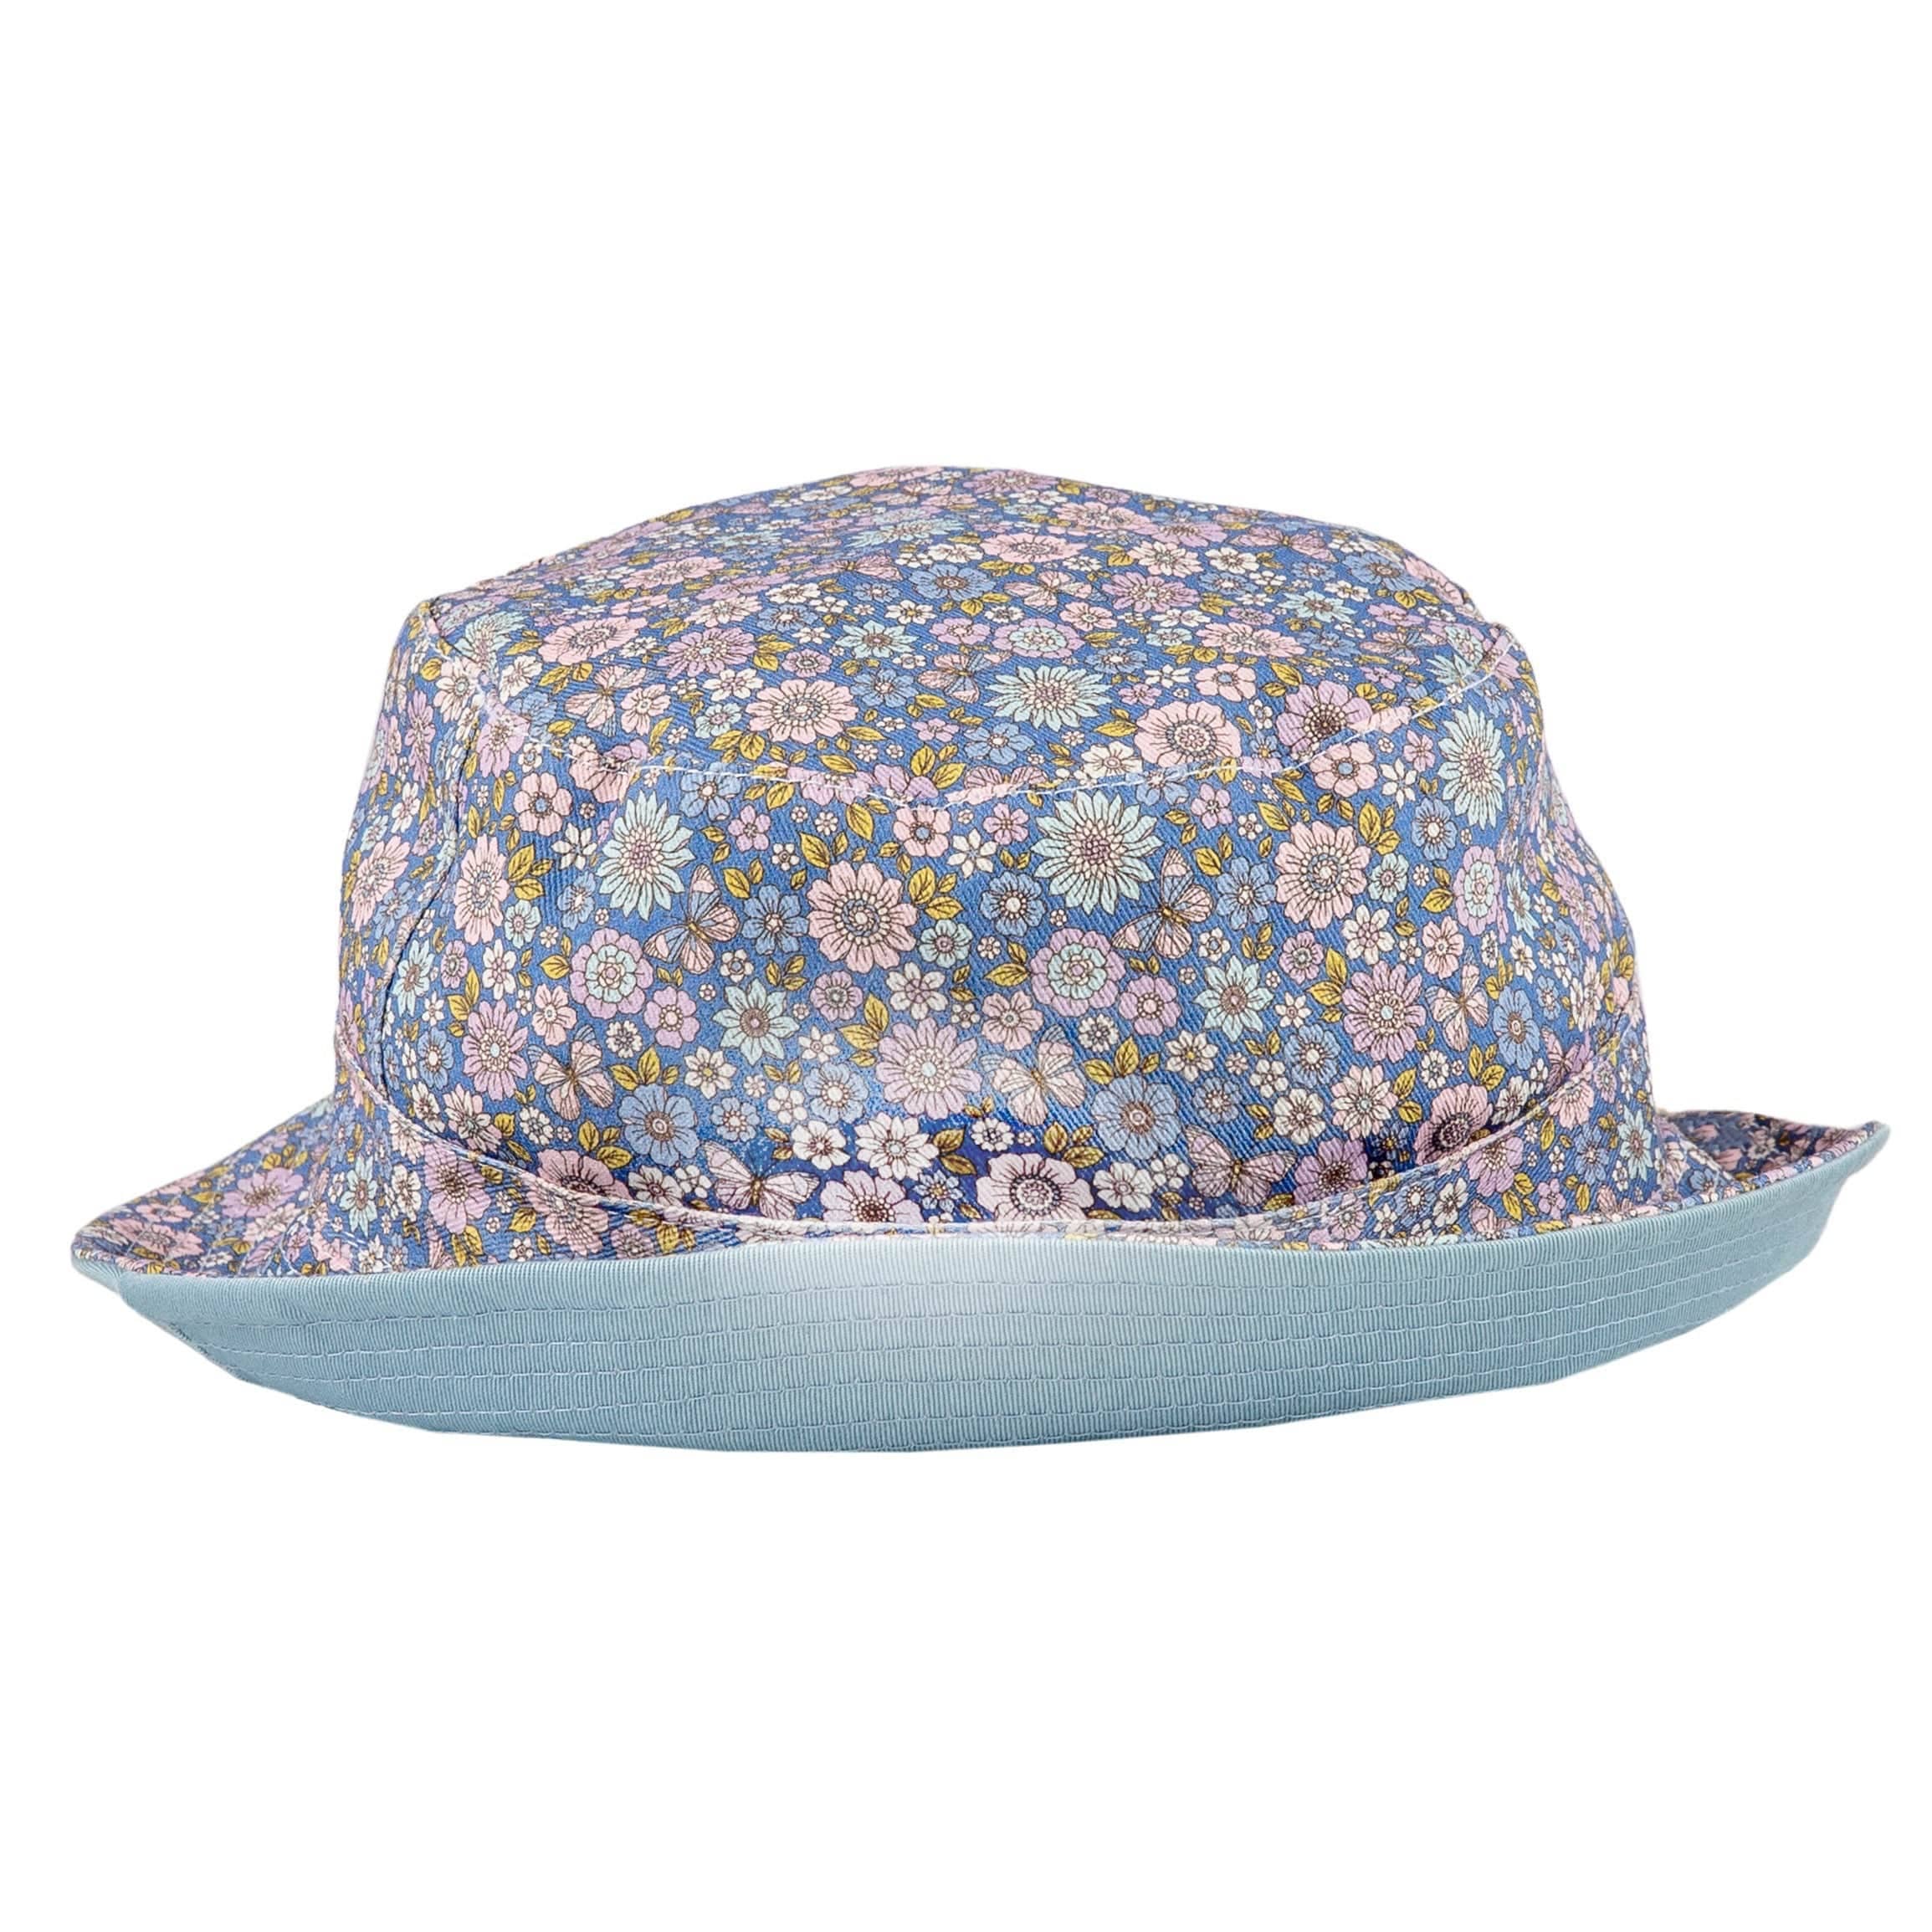 Topanga Reversible Bucket Hat with Floral and Chambray Sides